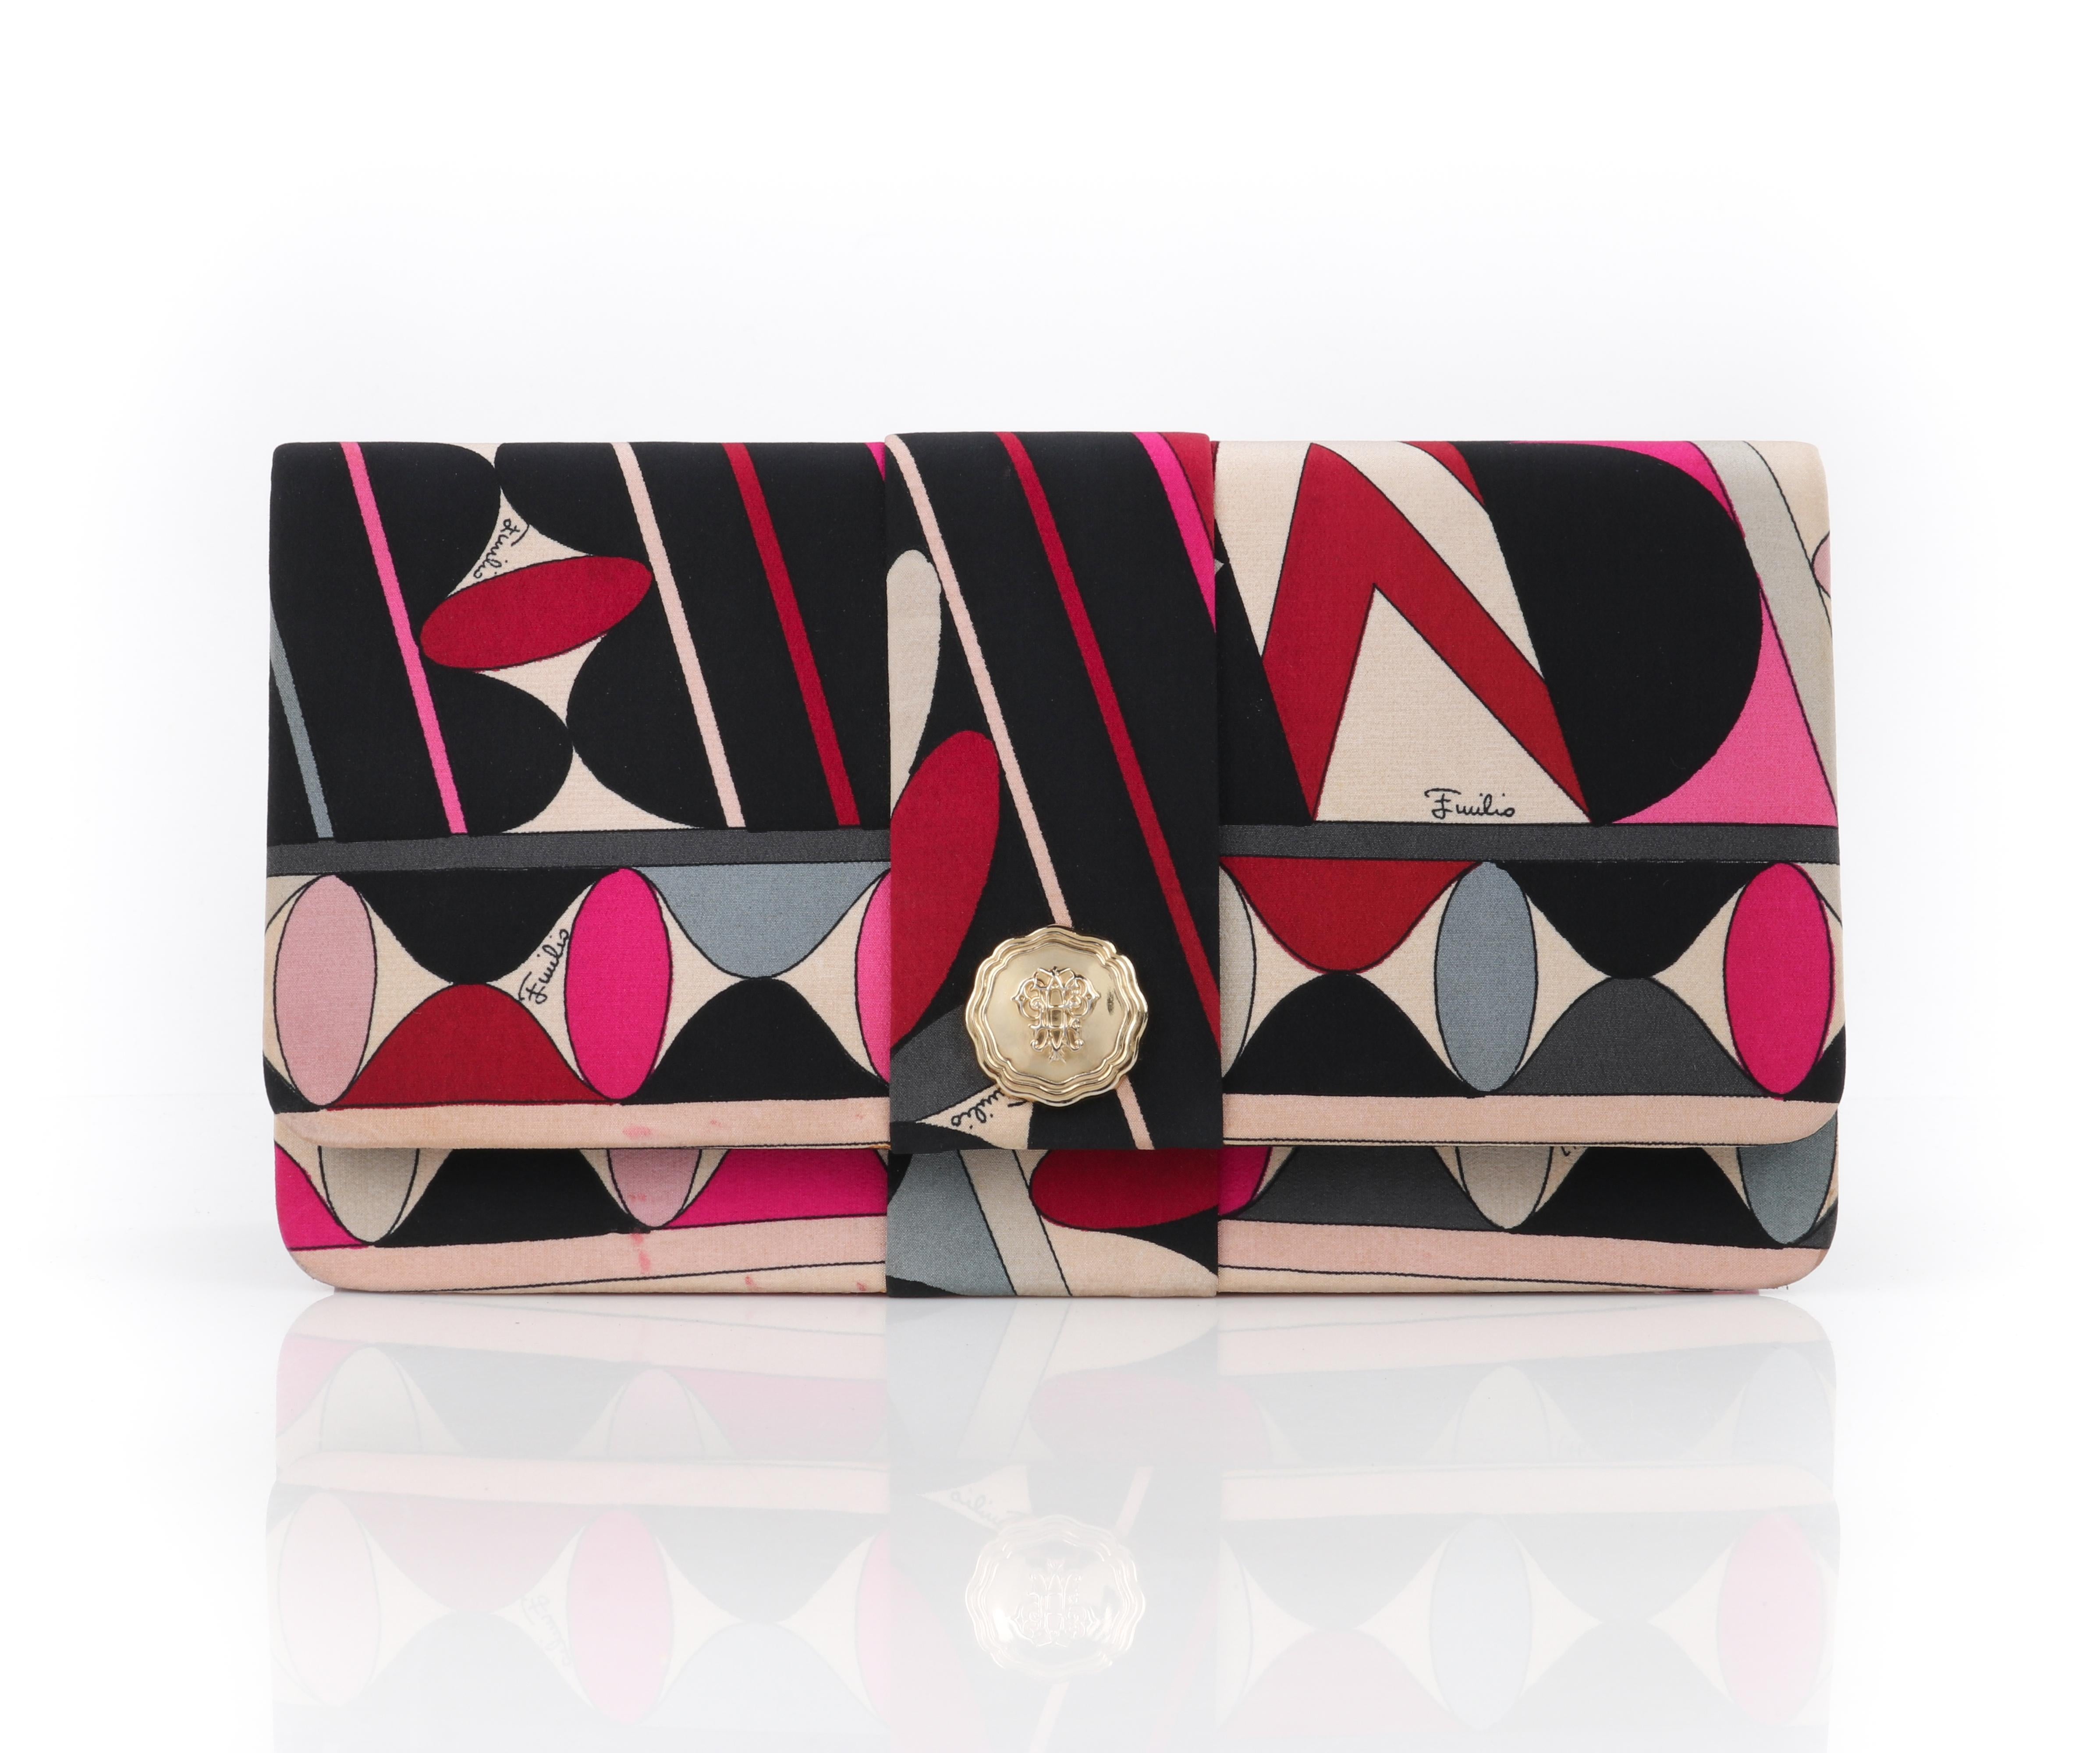 EMILIO PUCCI c.1960’s Multicolor Geometric Op Art Logo Silk Foldover Clutch Bag
 
Brand/Manufacturer: Emilio Pucci 
Circa: 1960’s
Designer: Emilio Pucci
Style: Clutch
Color(s): Exterior: shades of blue, black, pink, red, gray, cream, gold; Interior: